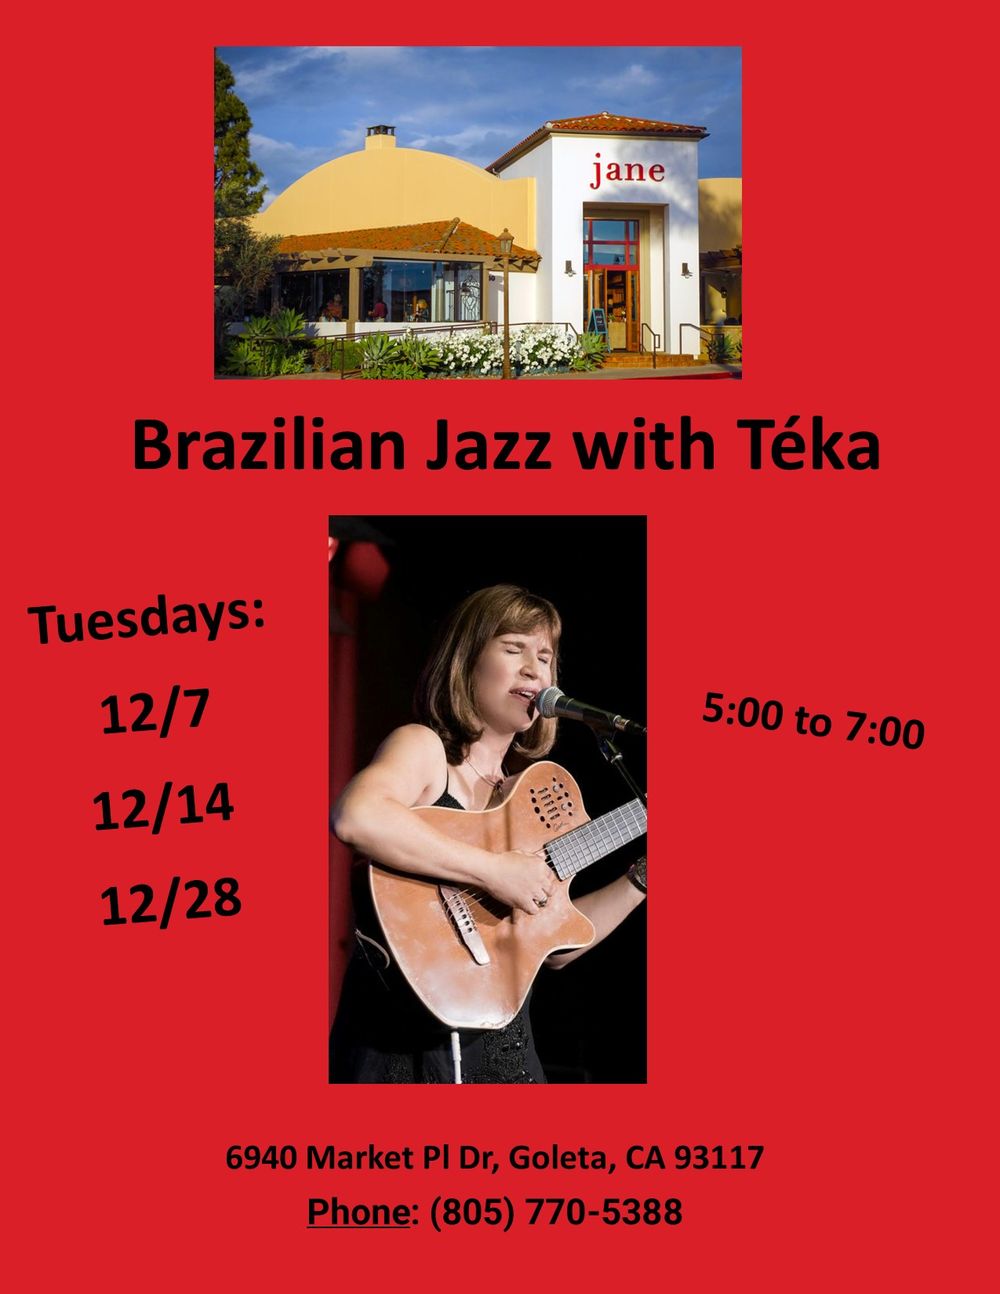 Stop by for some great American cuisine and Bossa Nova with Téka